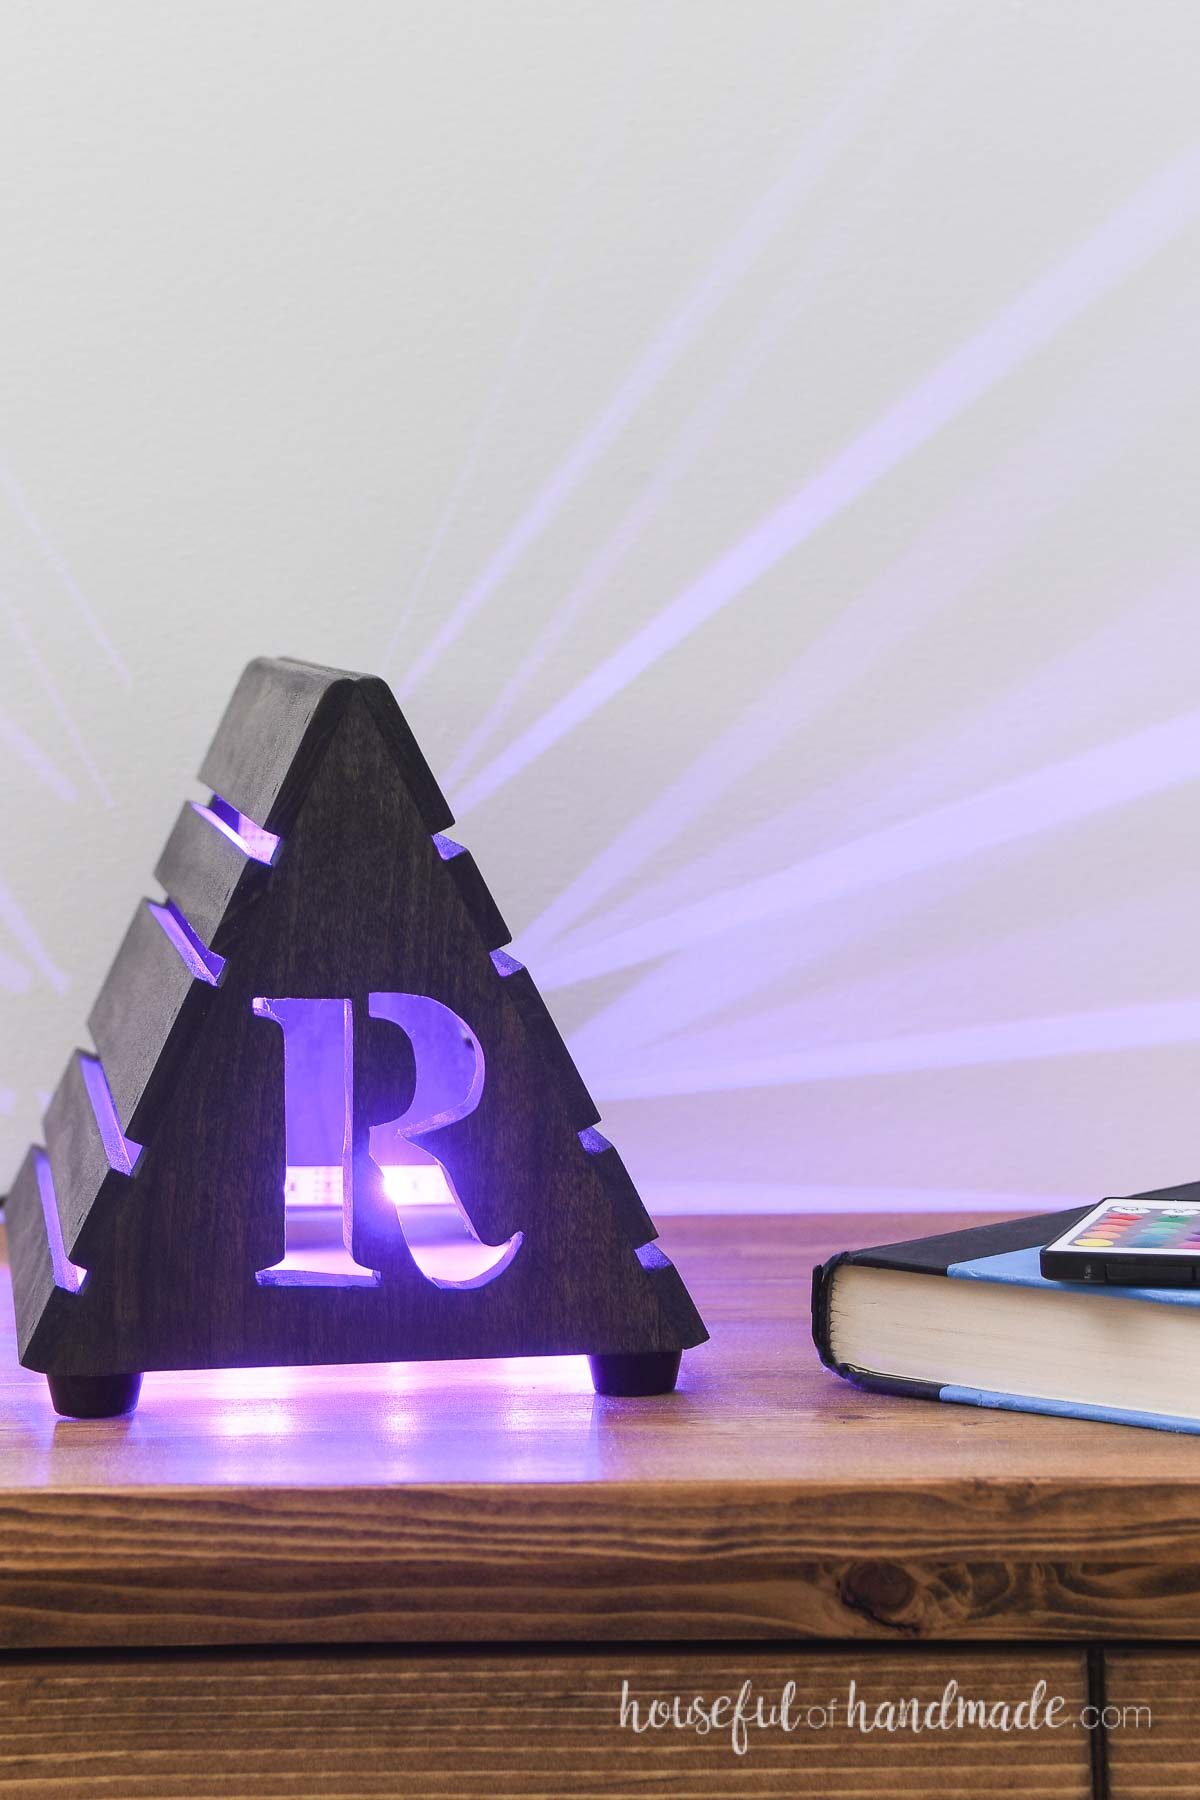 Purple lights glowing from the slats and cutout R on the nightlight book stand. 